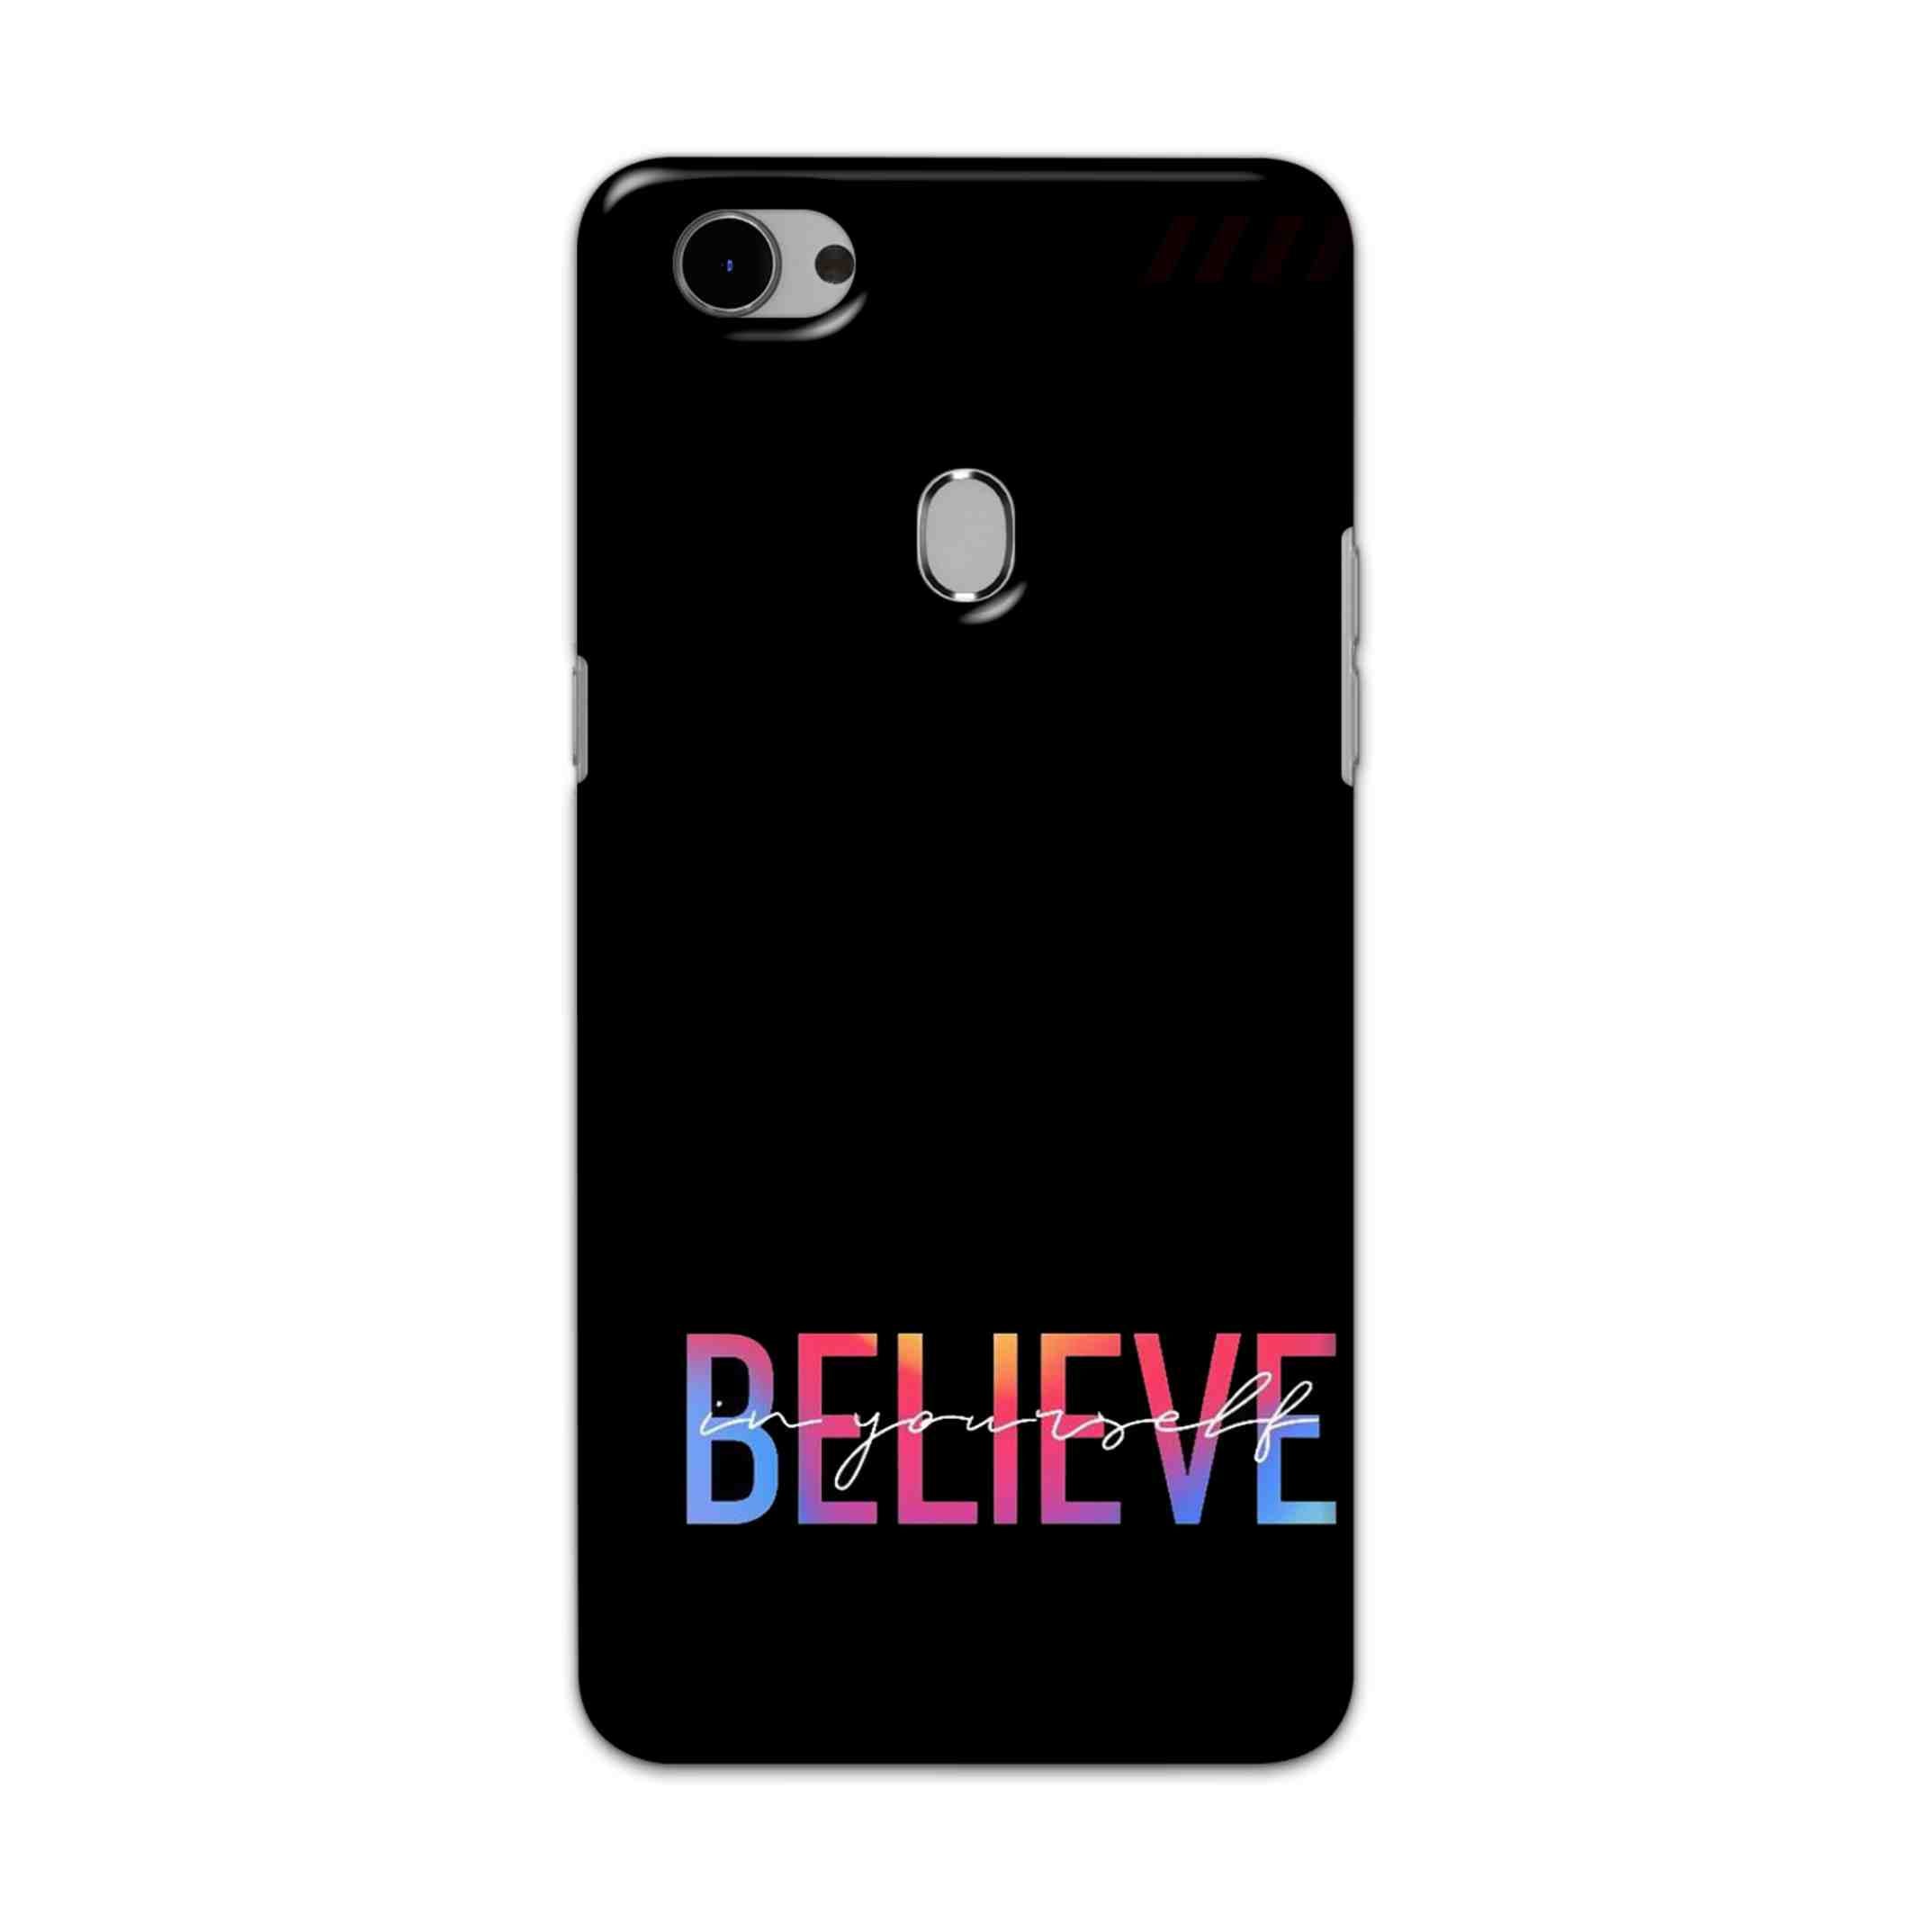 Buy Believe Hard Back Mobile Phone Case Cover For Oppo F7 Online